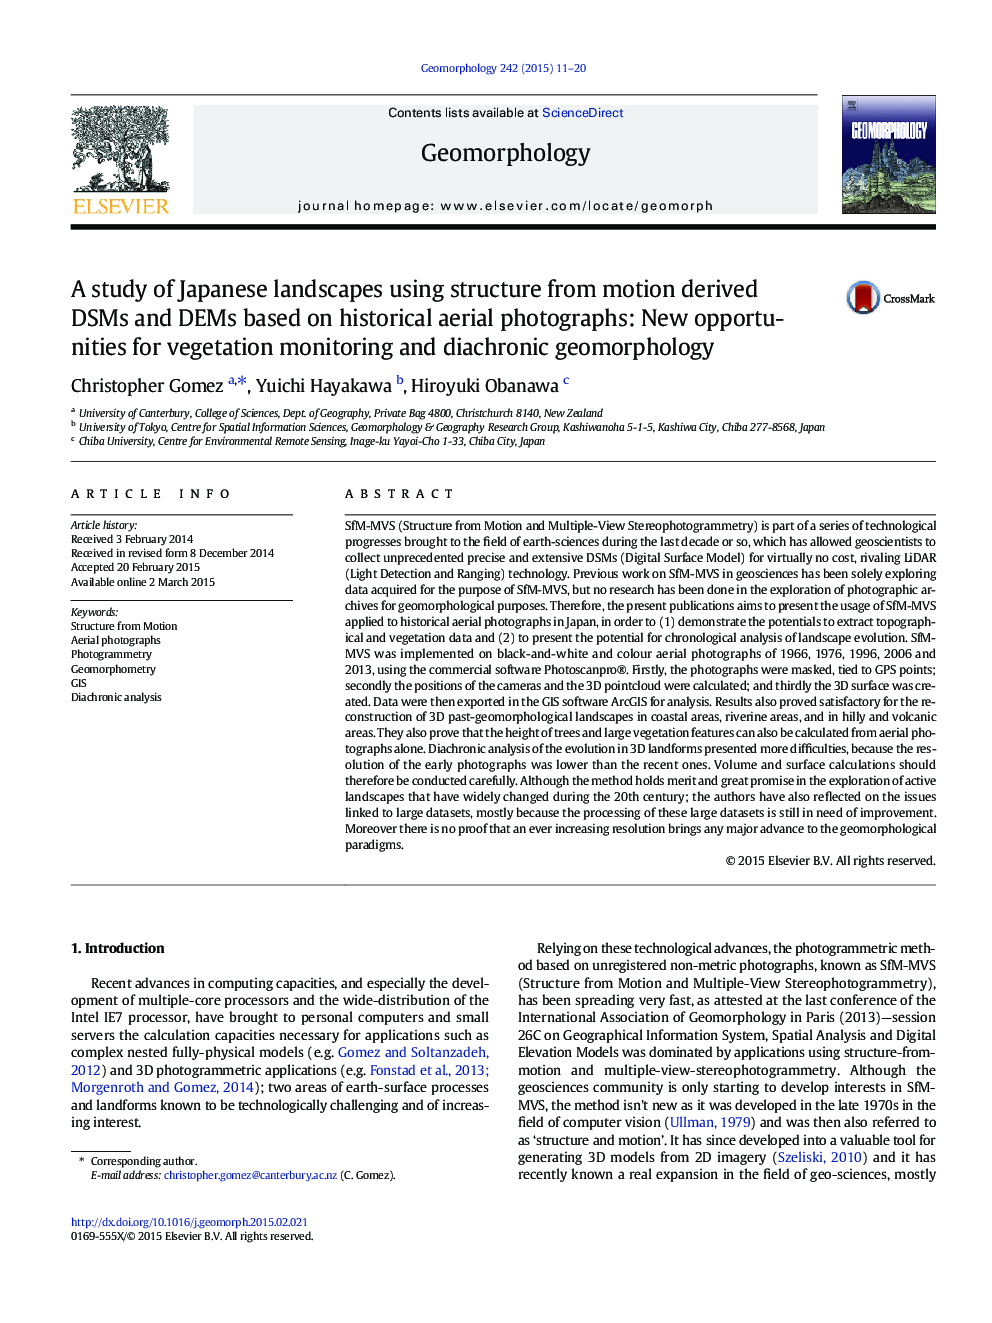 A study of Japanese landscapes using structure from motion derived DSMs and DEMs based on historical aerial photographs: New opportunities for vegetation monitoring and diachronic geomorphology